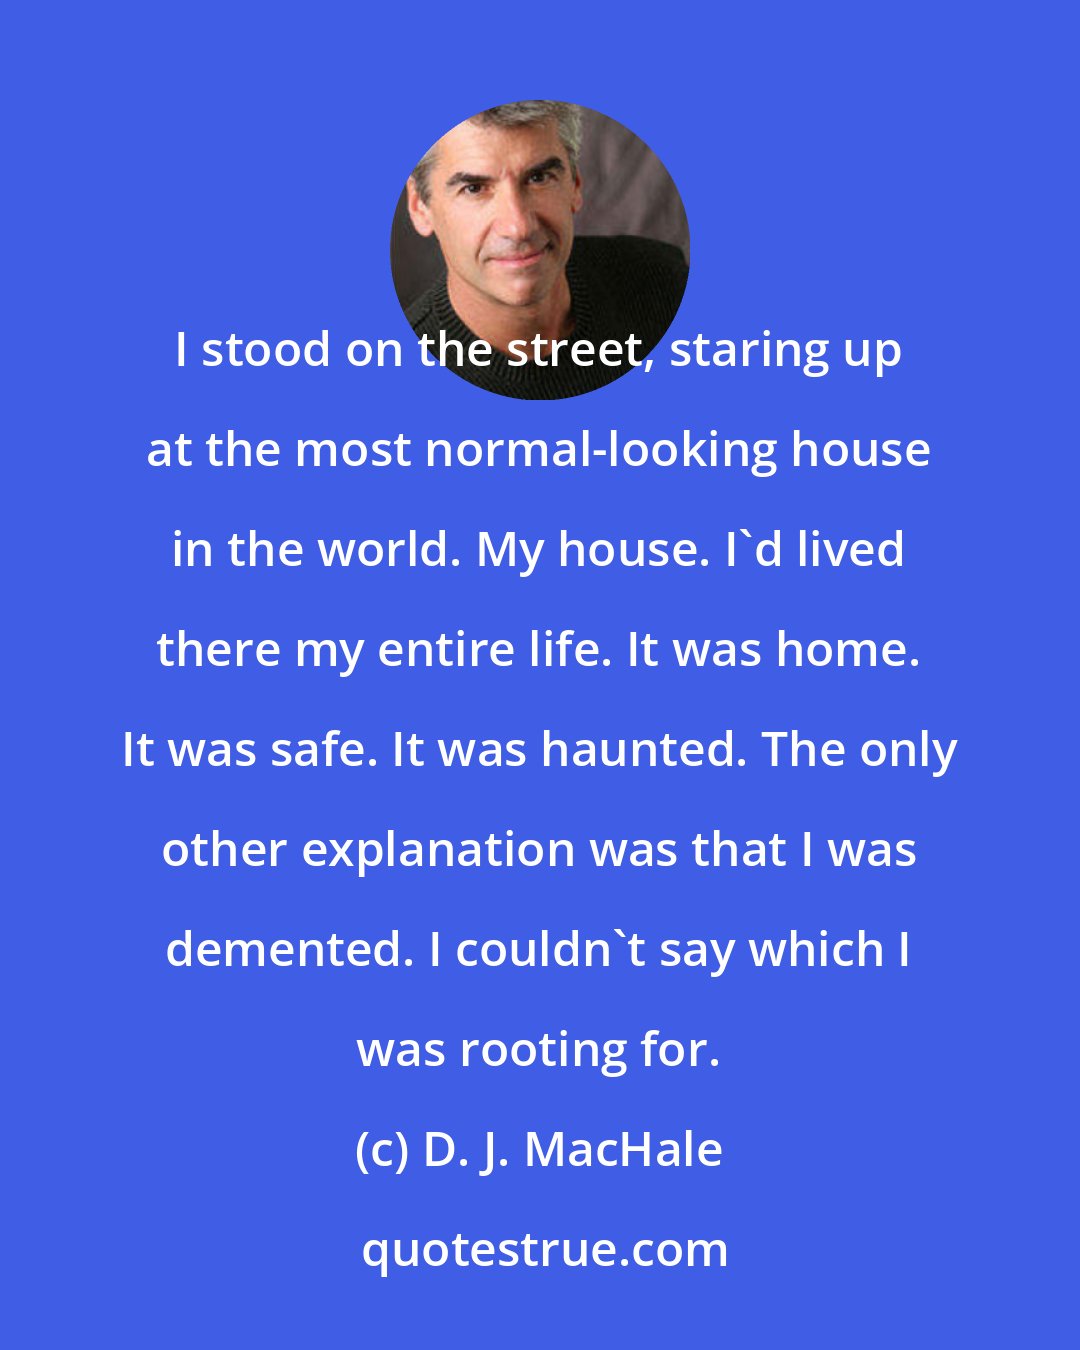 D. J. MacHale: I stood on the street, staring up at the most normal-looking house in the world. My house. I'd lived there my entire life. It was home. It was safe. It was haunted. The only other explanation was that I was demented. I couldn't say which I was rooting for.